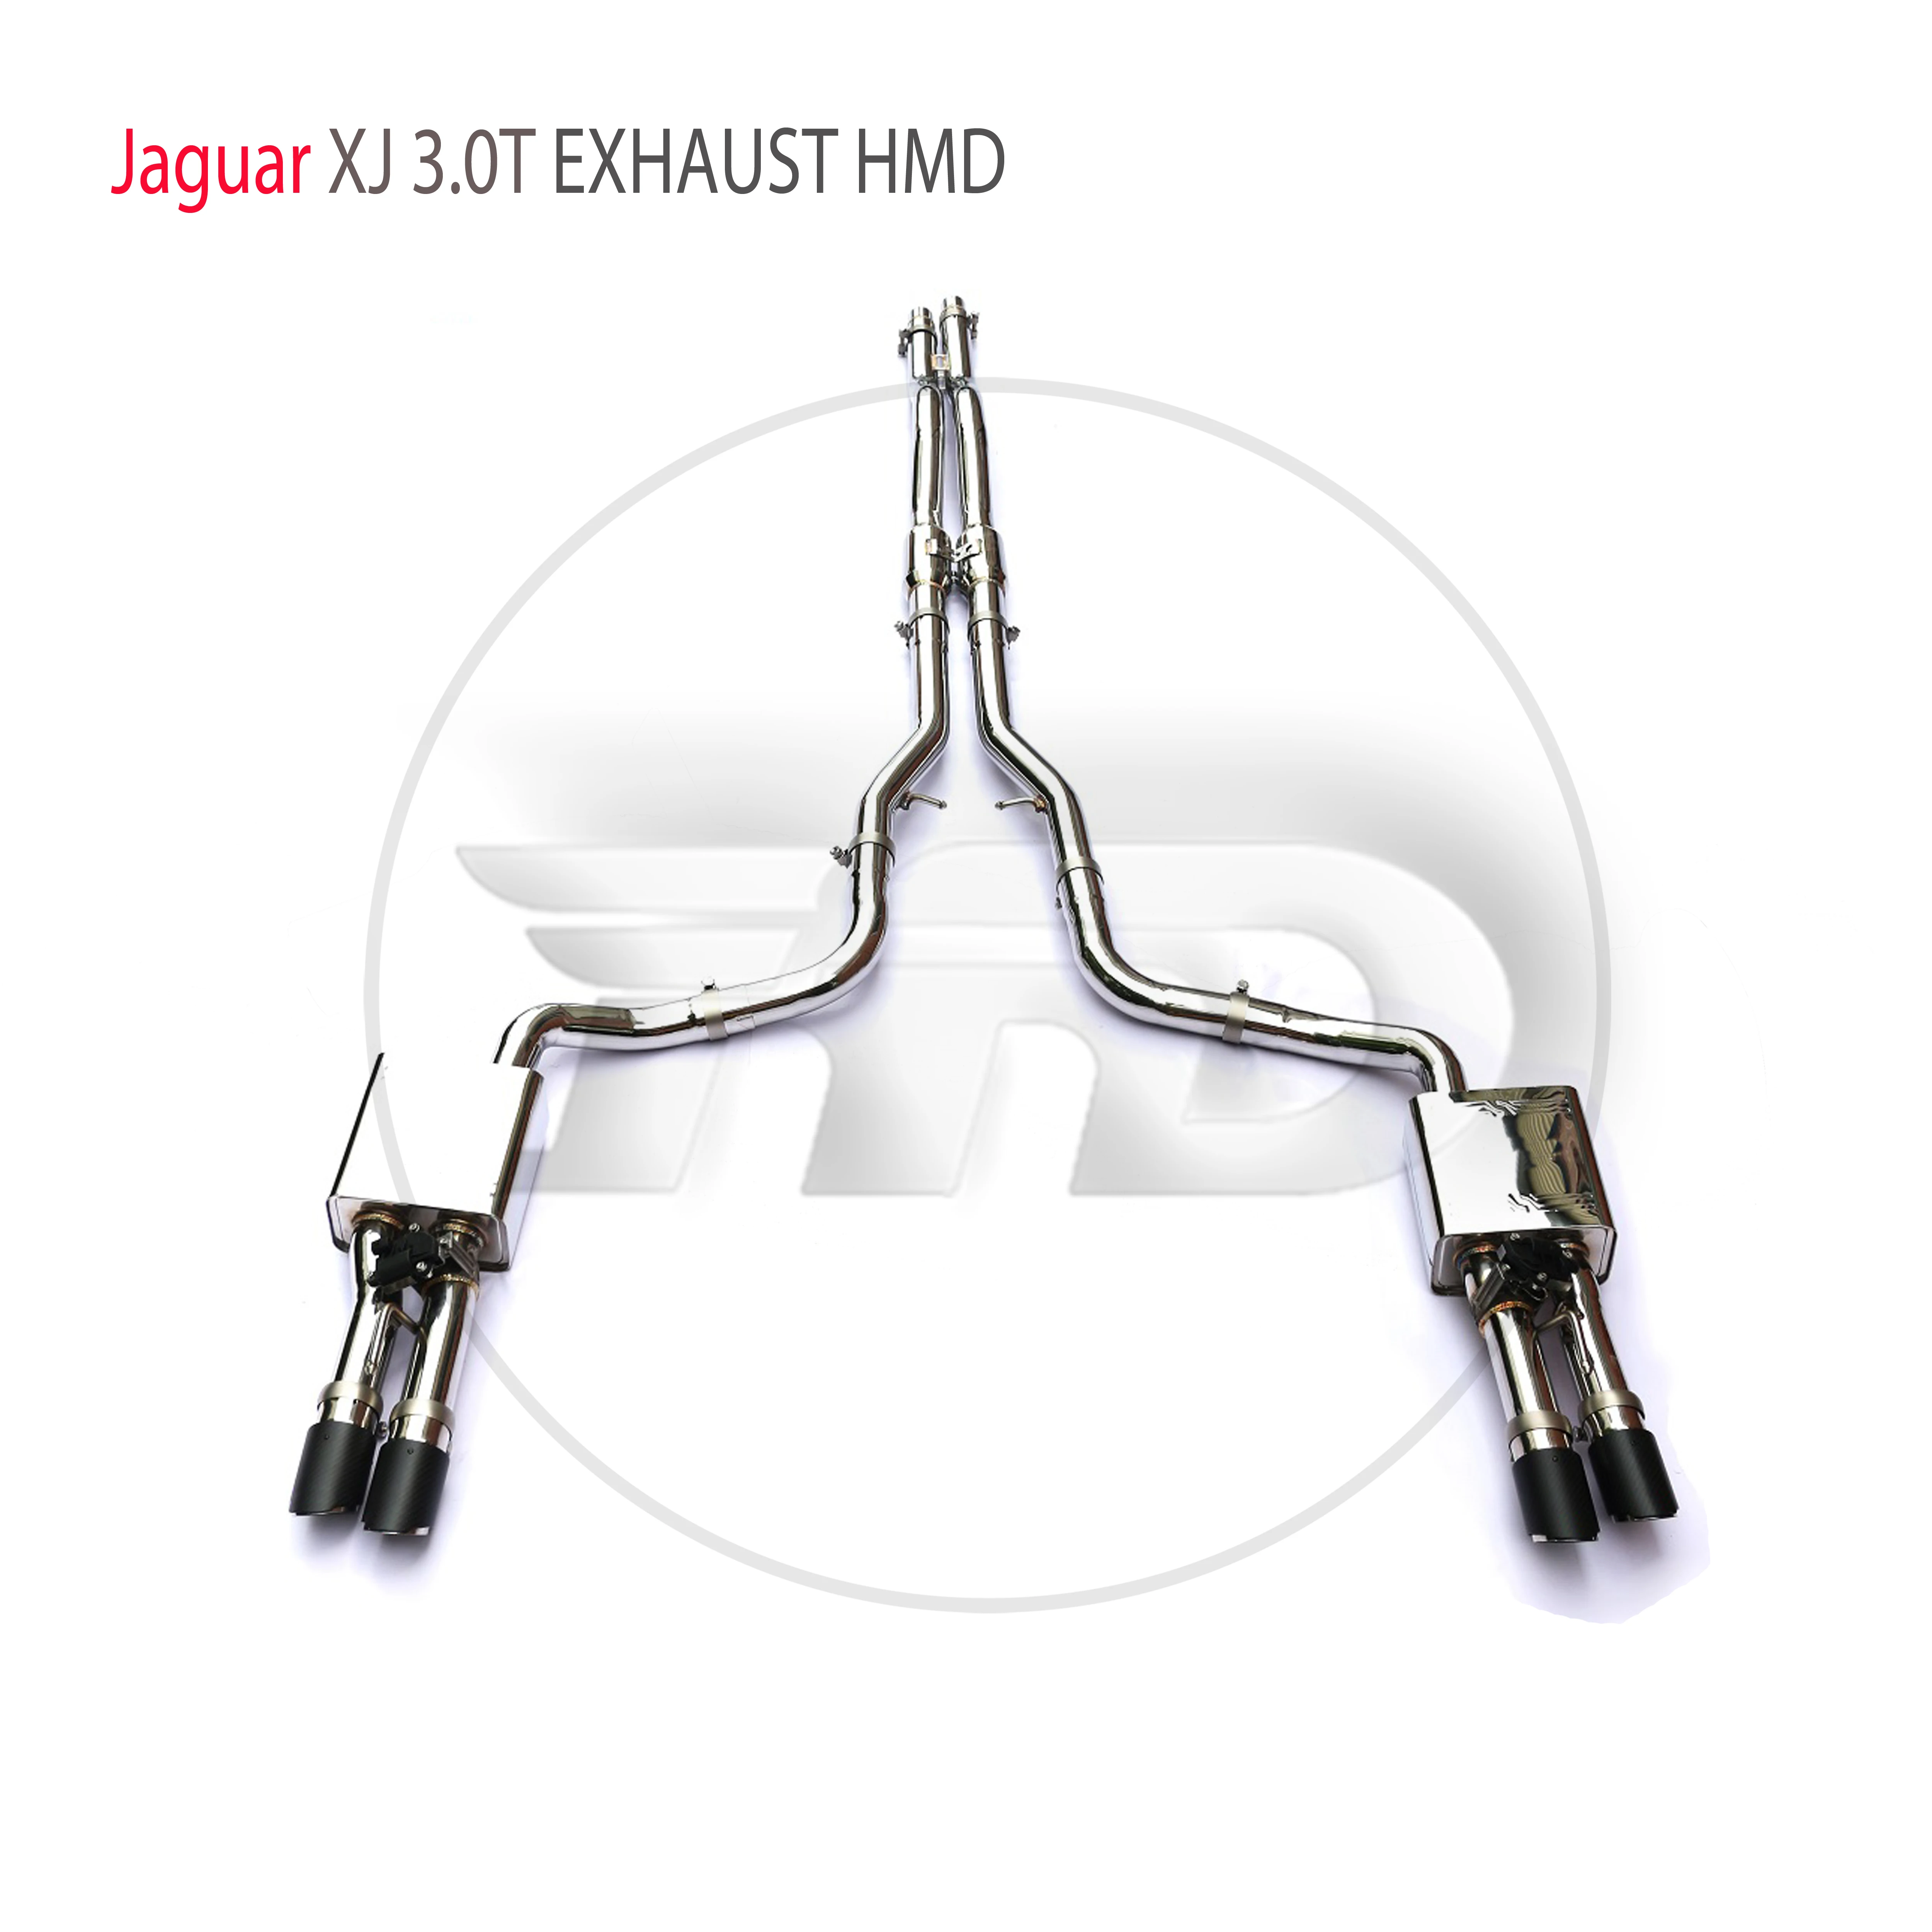 

HMD Stainless Steel Exhaust System Performance Catback is Suitable for Jaguar XJ 3.0T Car Muffler